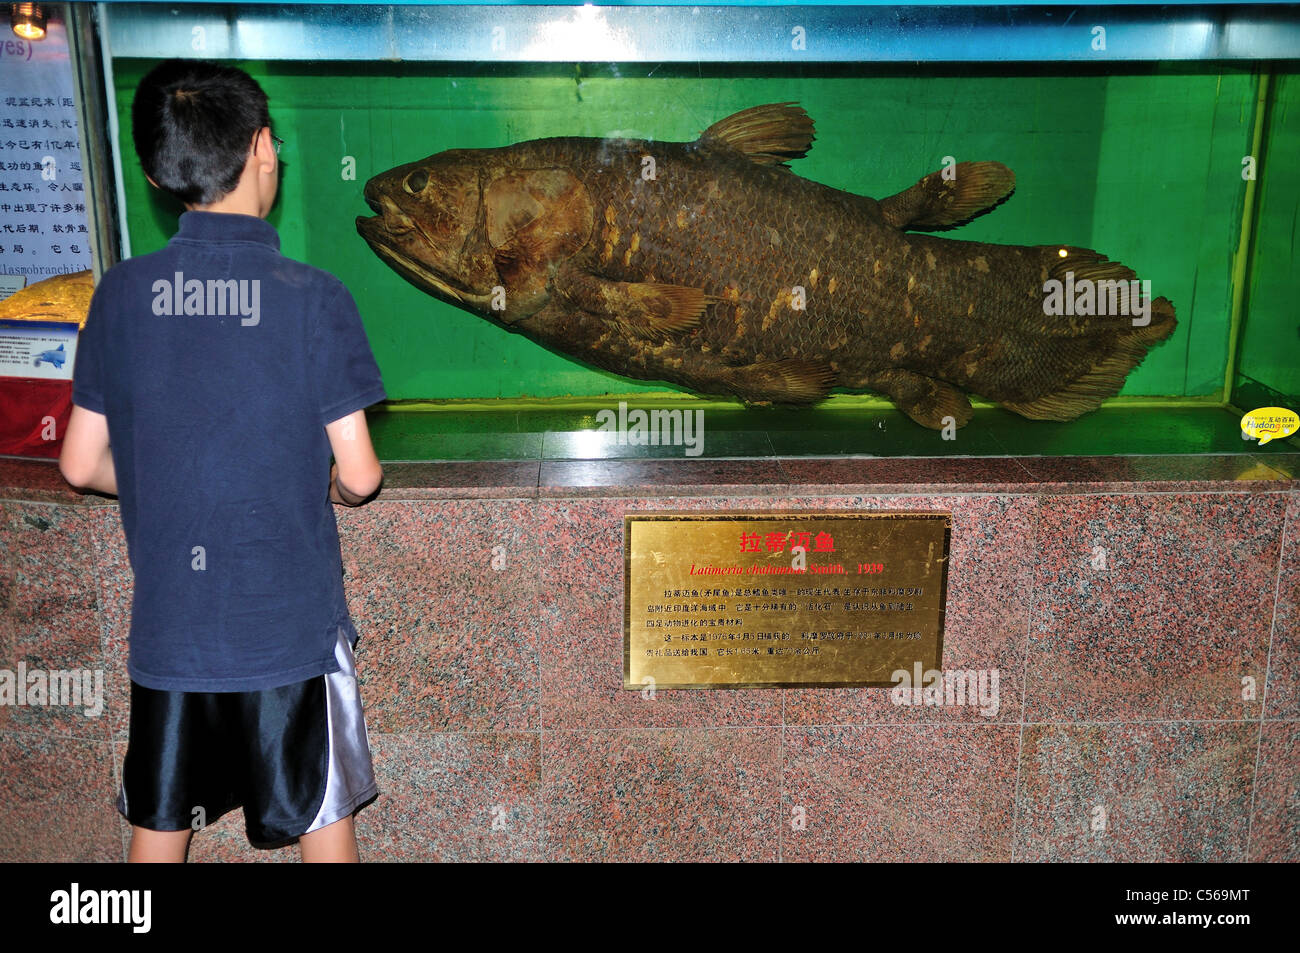 A young boy taking a close look at the Coelacanth (Latimeria chalumnae) specimen in display. Beijing, China. Stock Photo